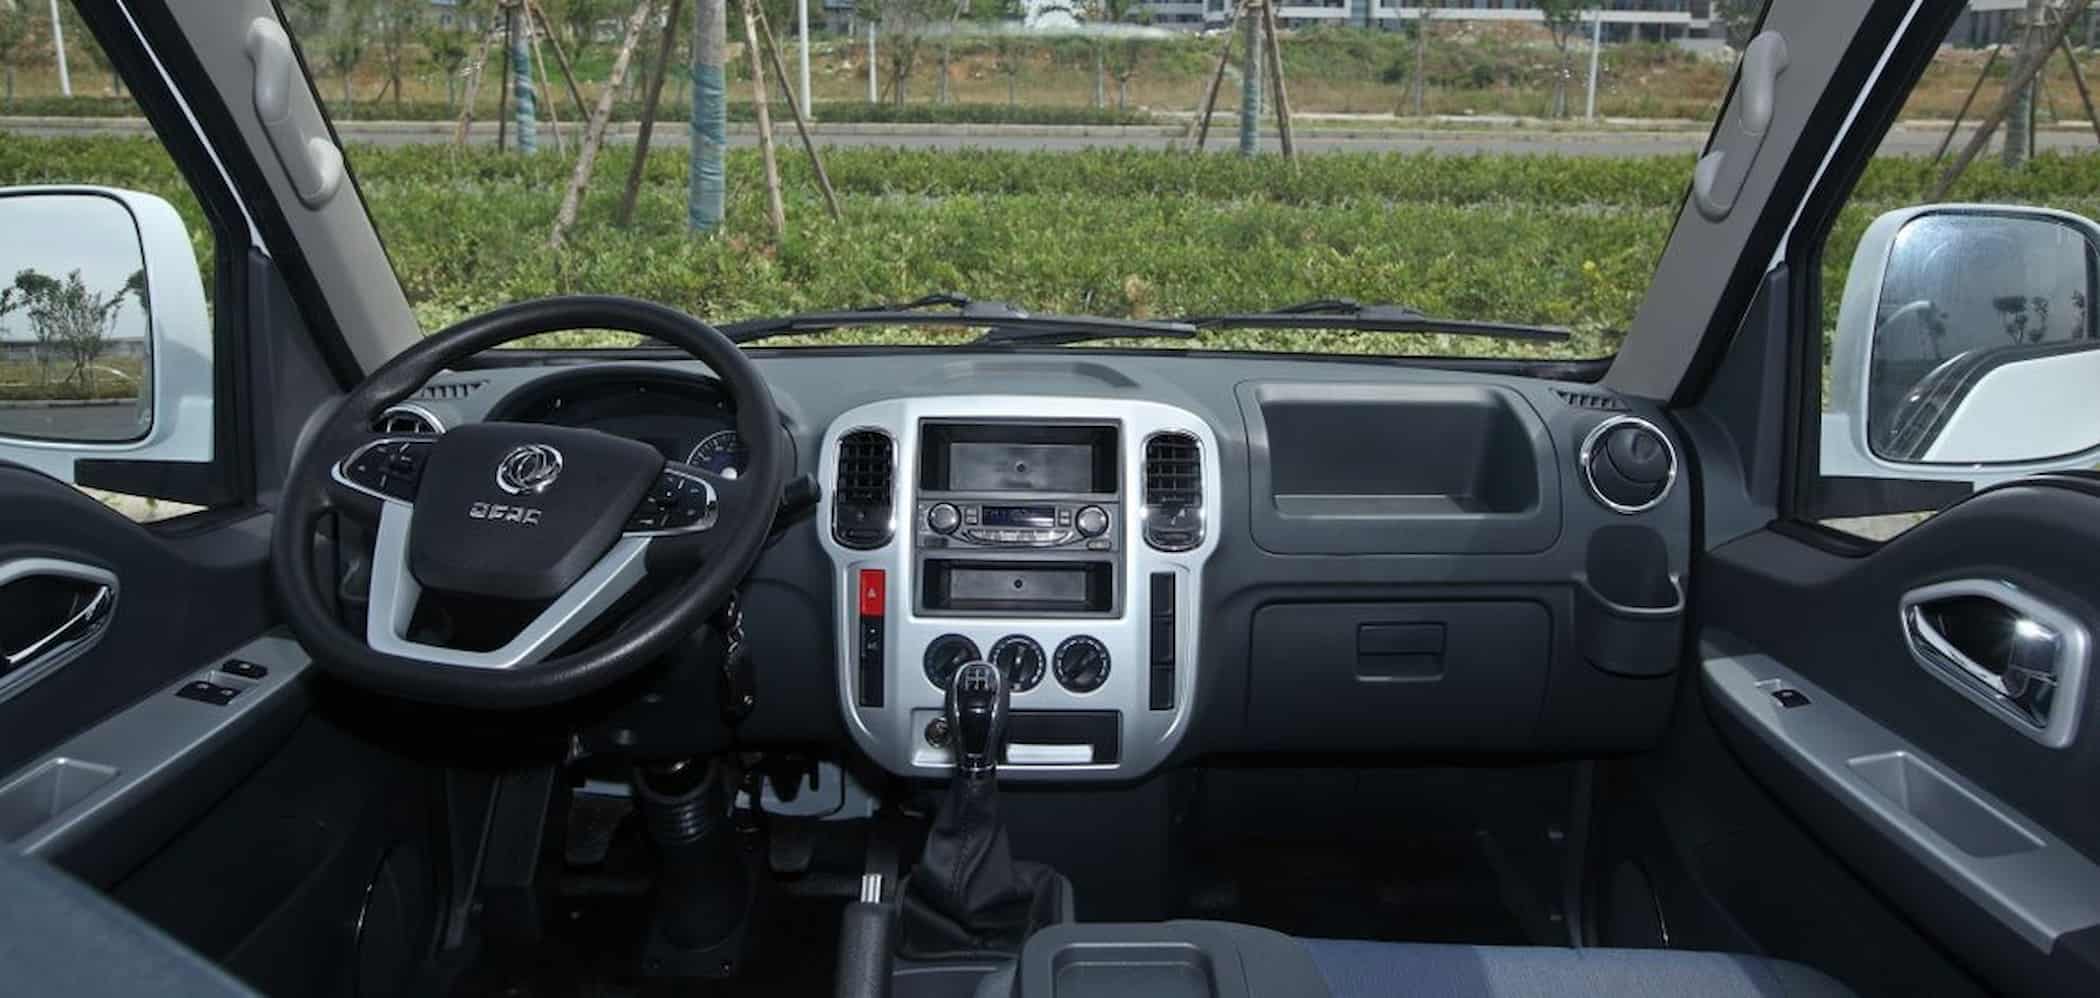 dongfeng captain t 2022 interior s